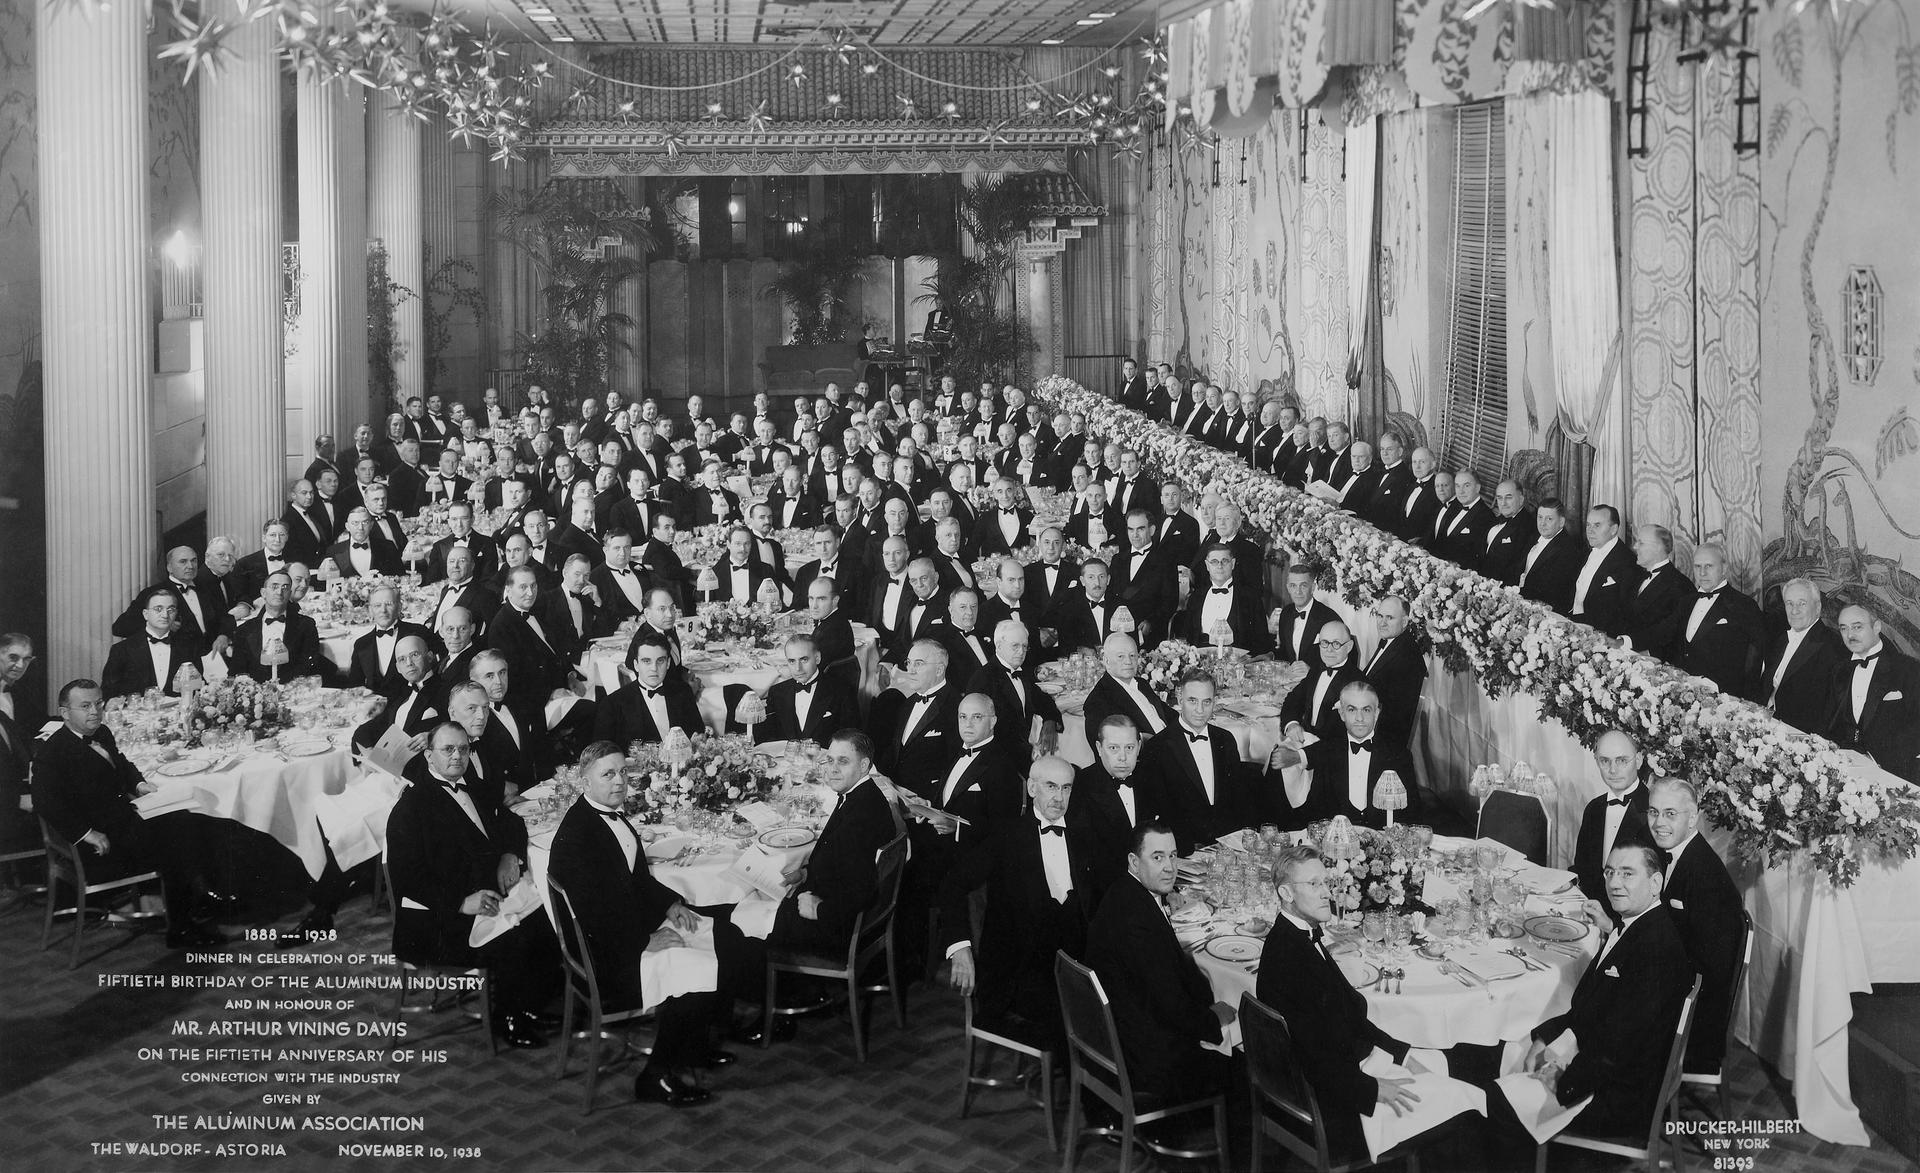 Old black and white photo of businessmen in black tie attire at a company event 